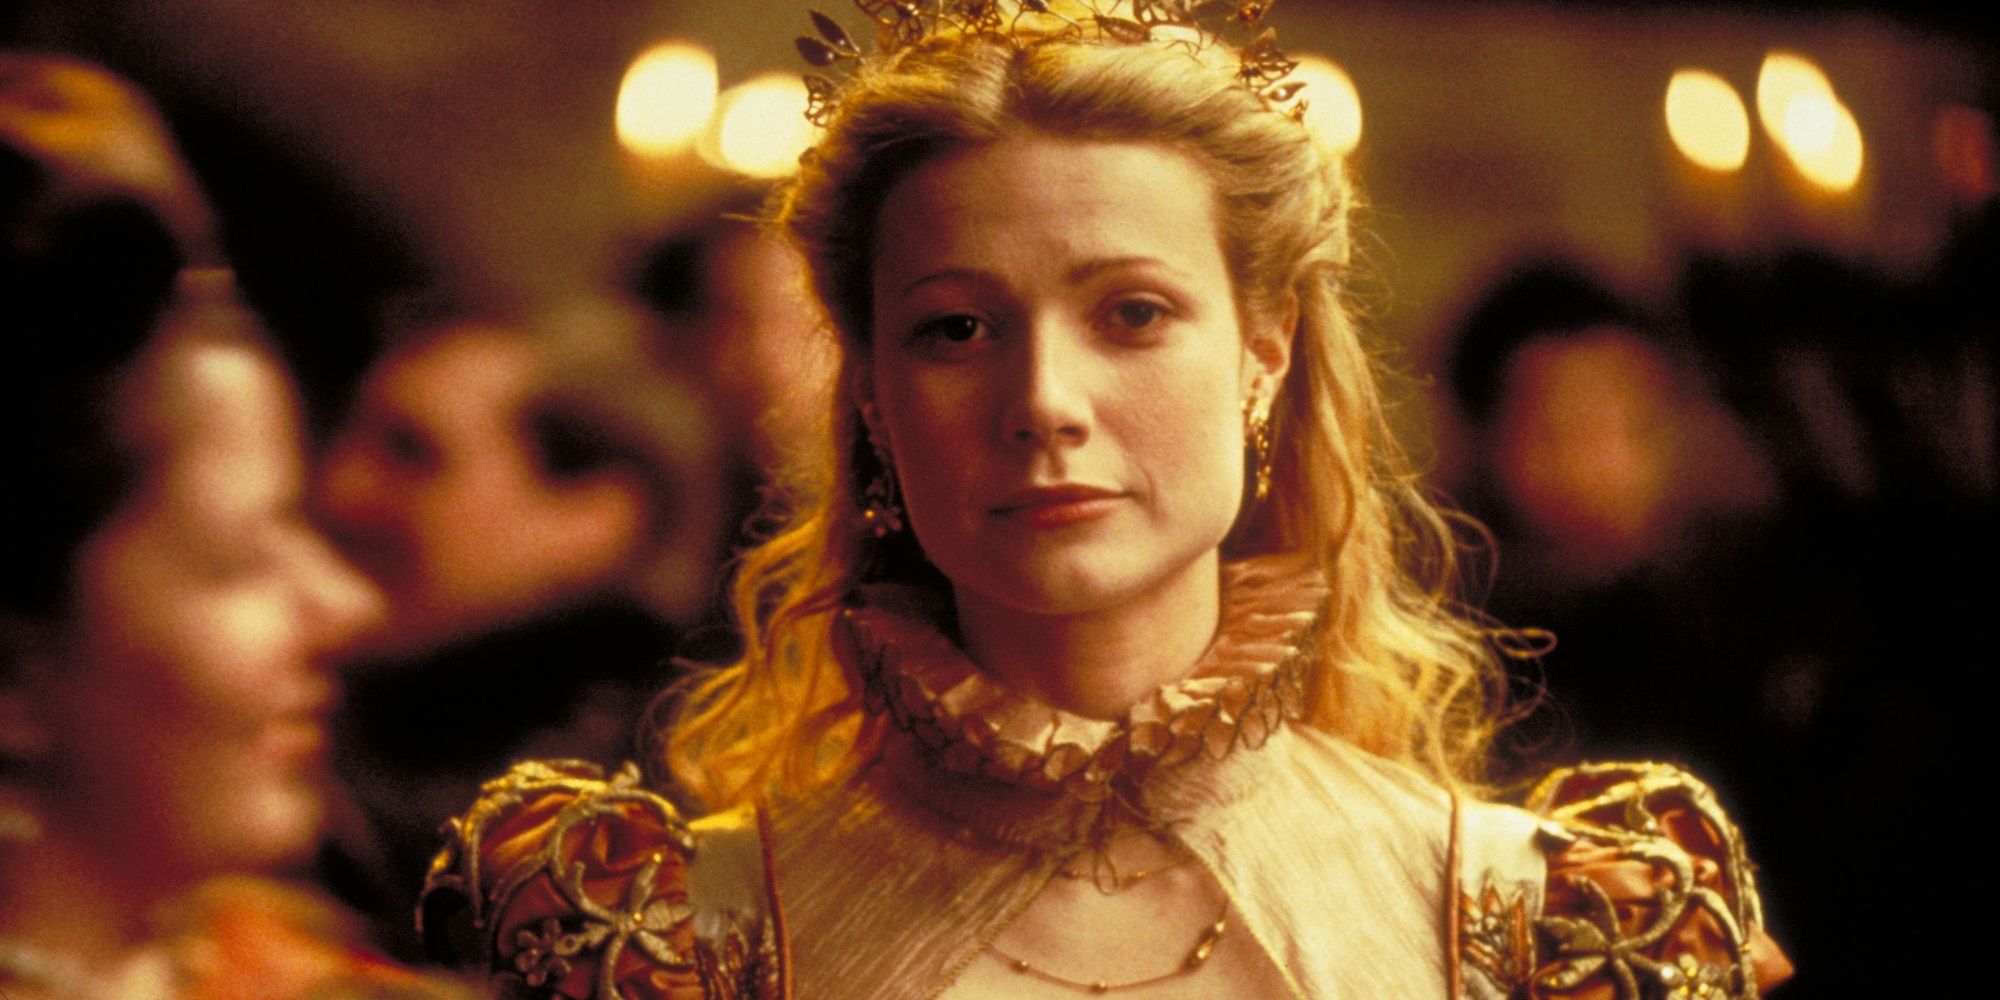 Gwyneth Paltrow in historical garb in Shakespeare in Love